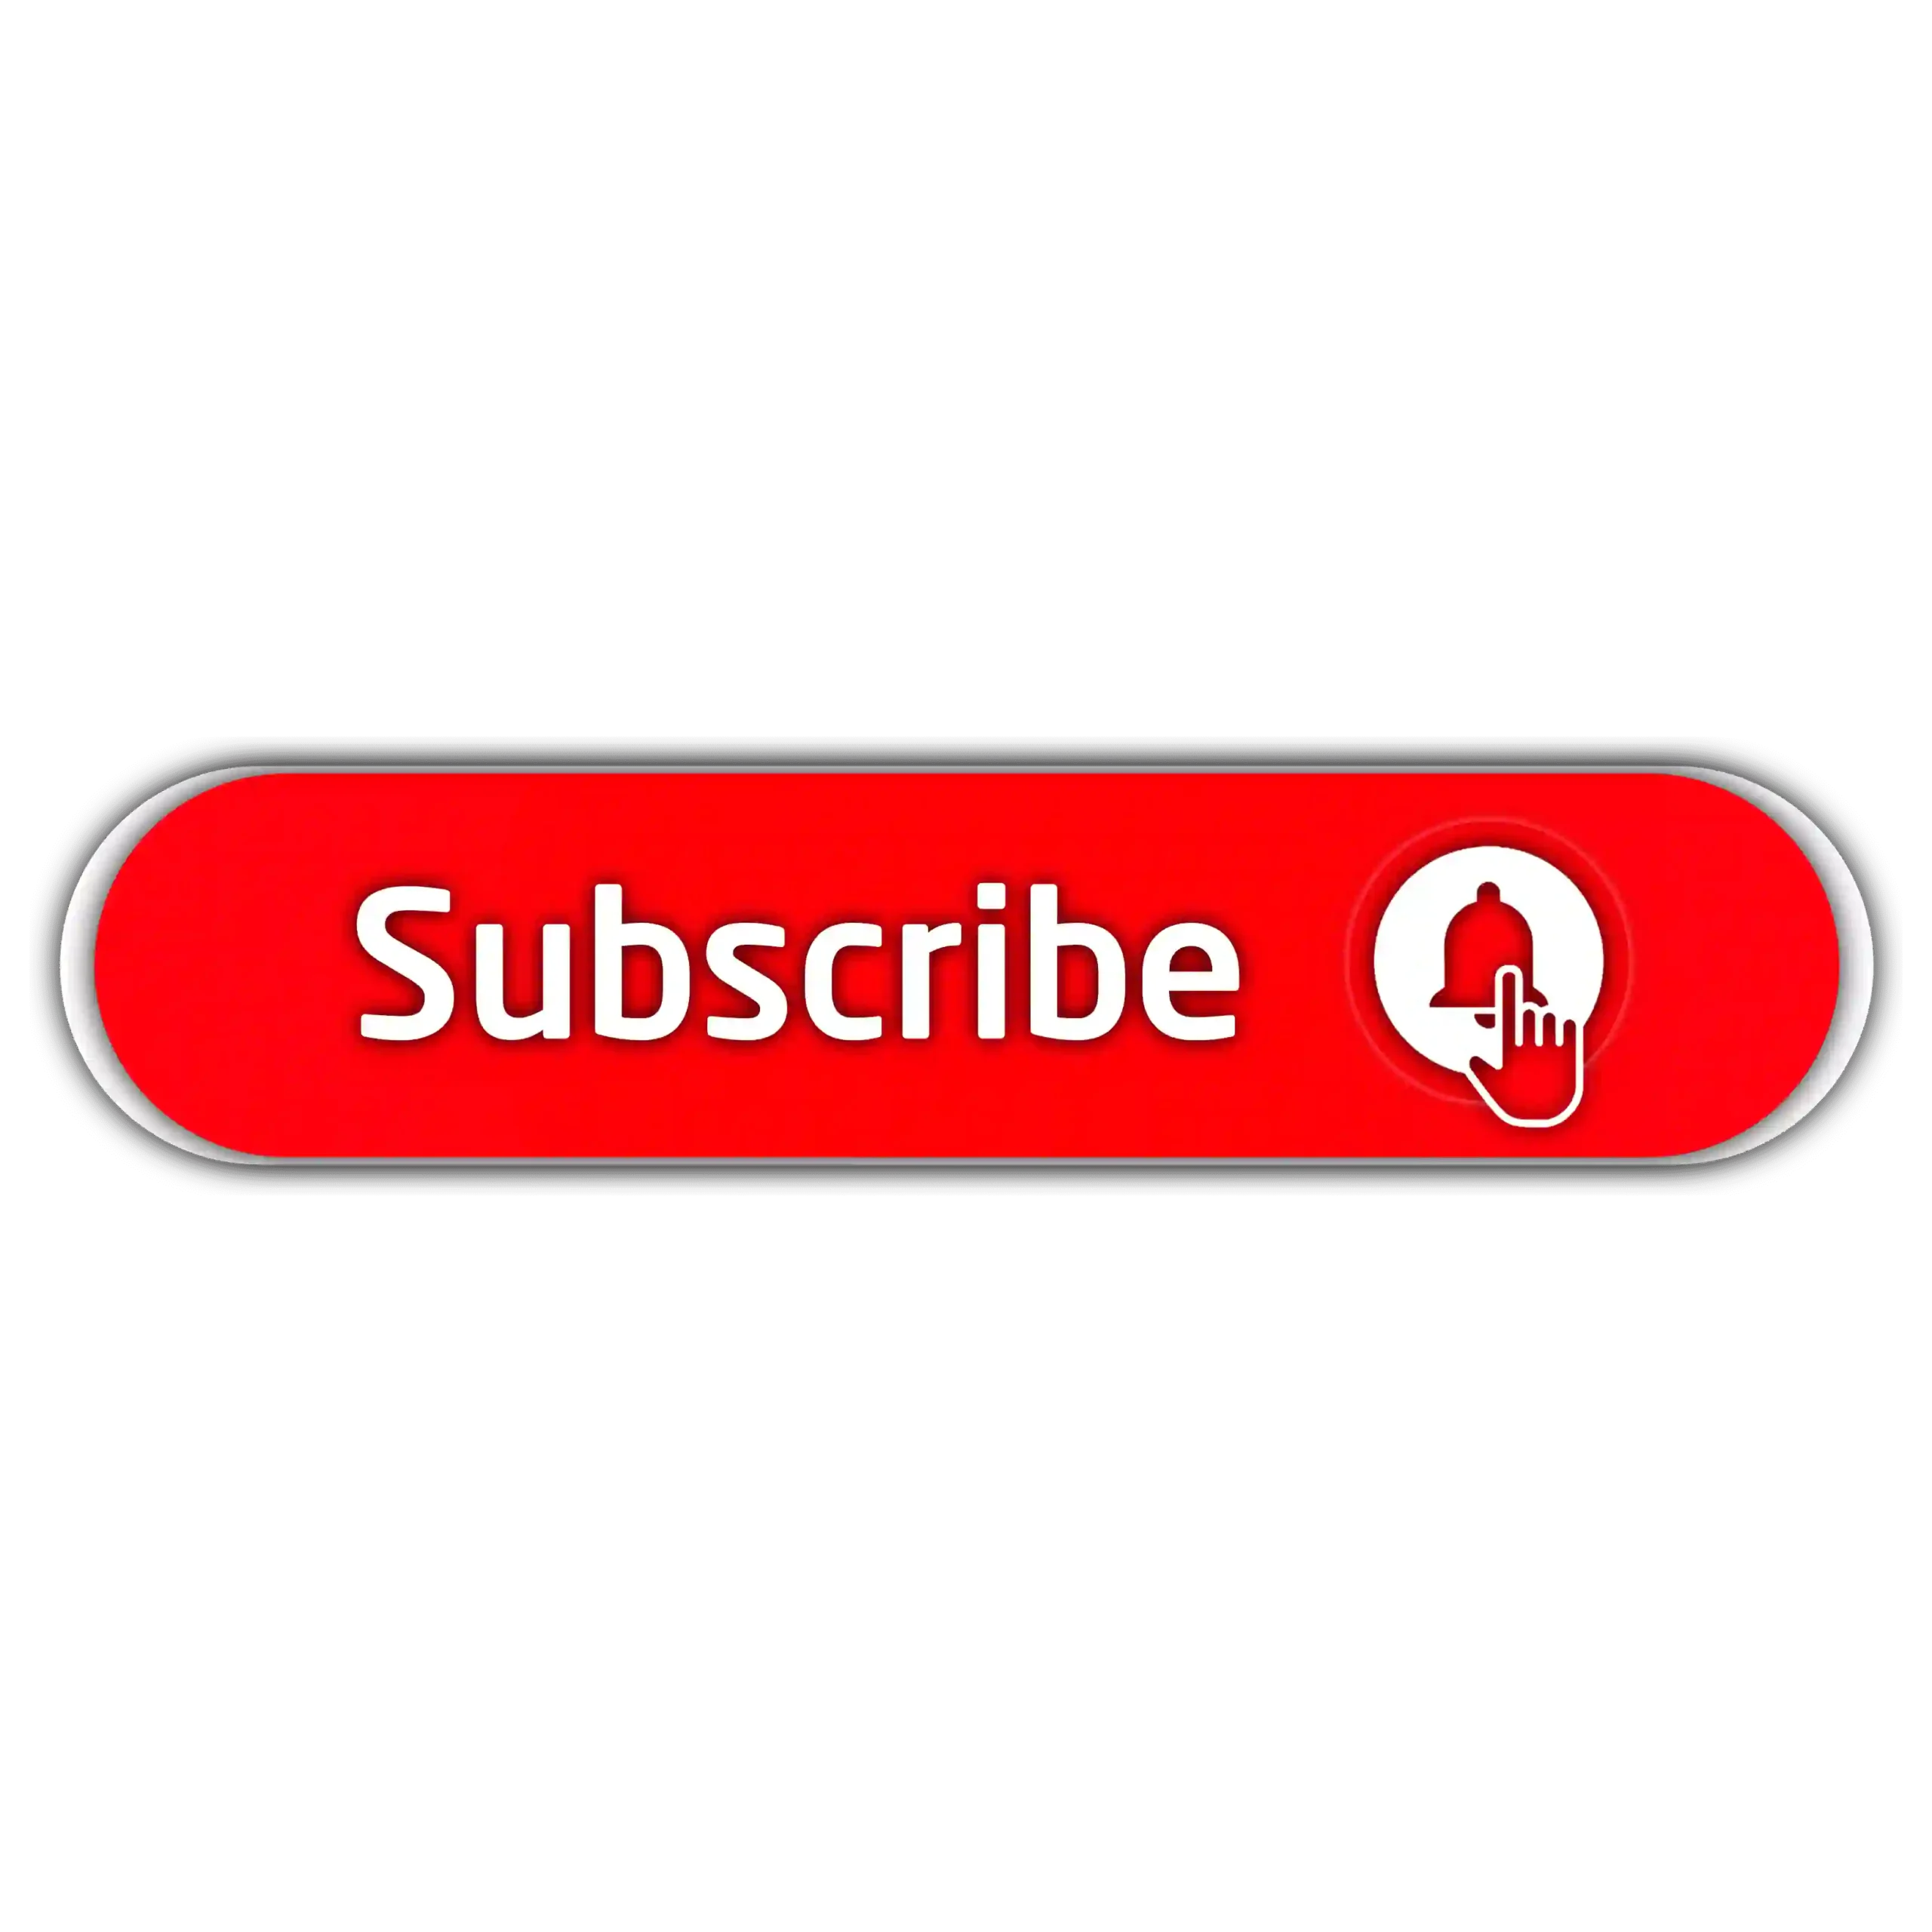 Subscribe logo Free Download Png